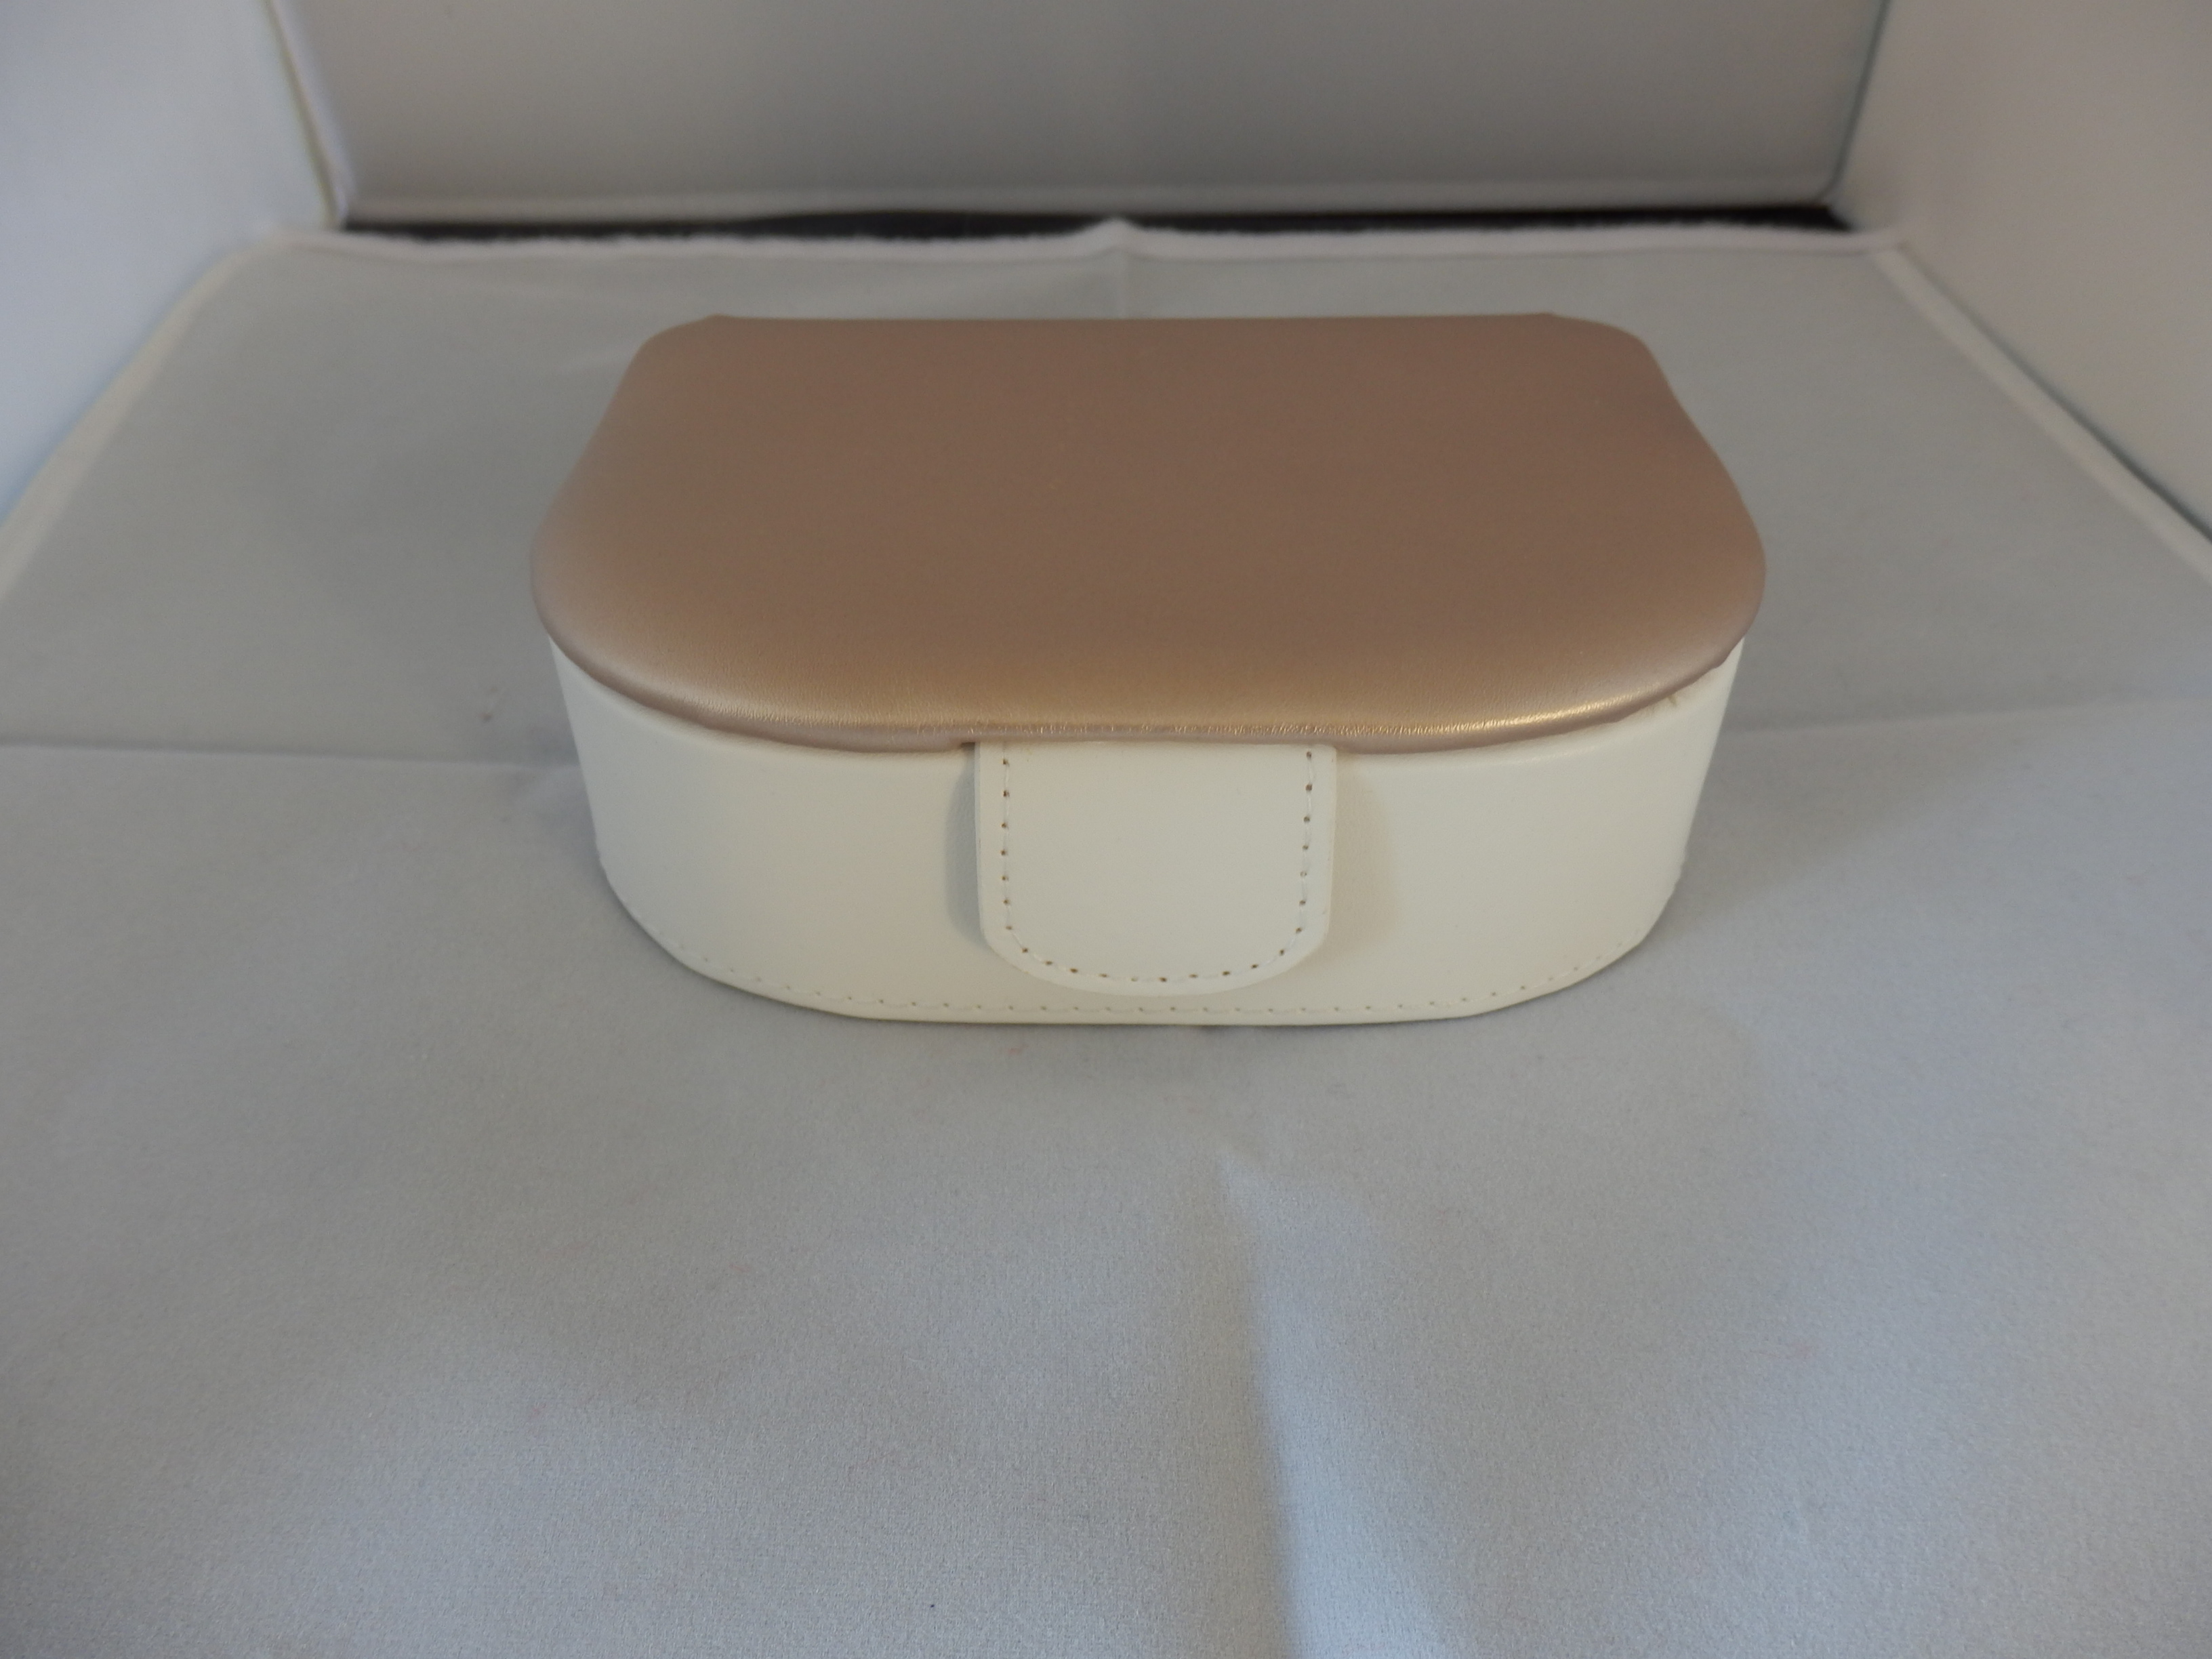 Portable Travel PU Leather Jewellery Box by aeepd